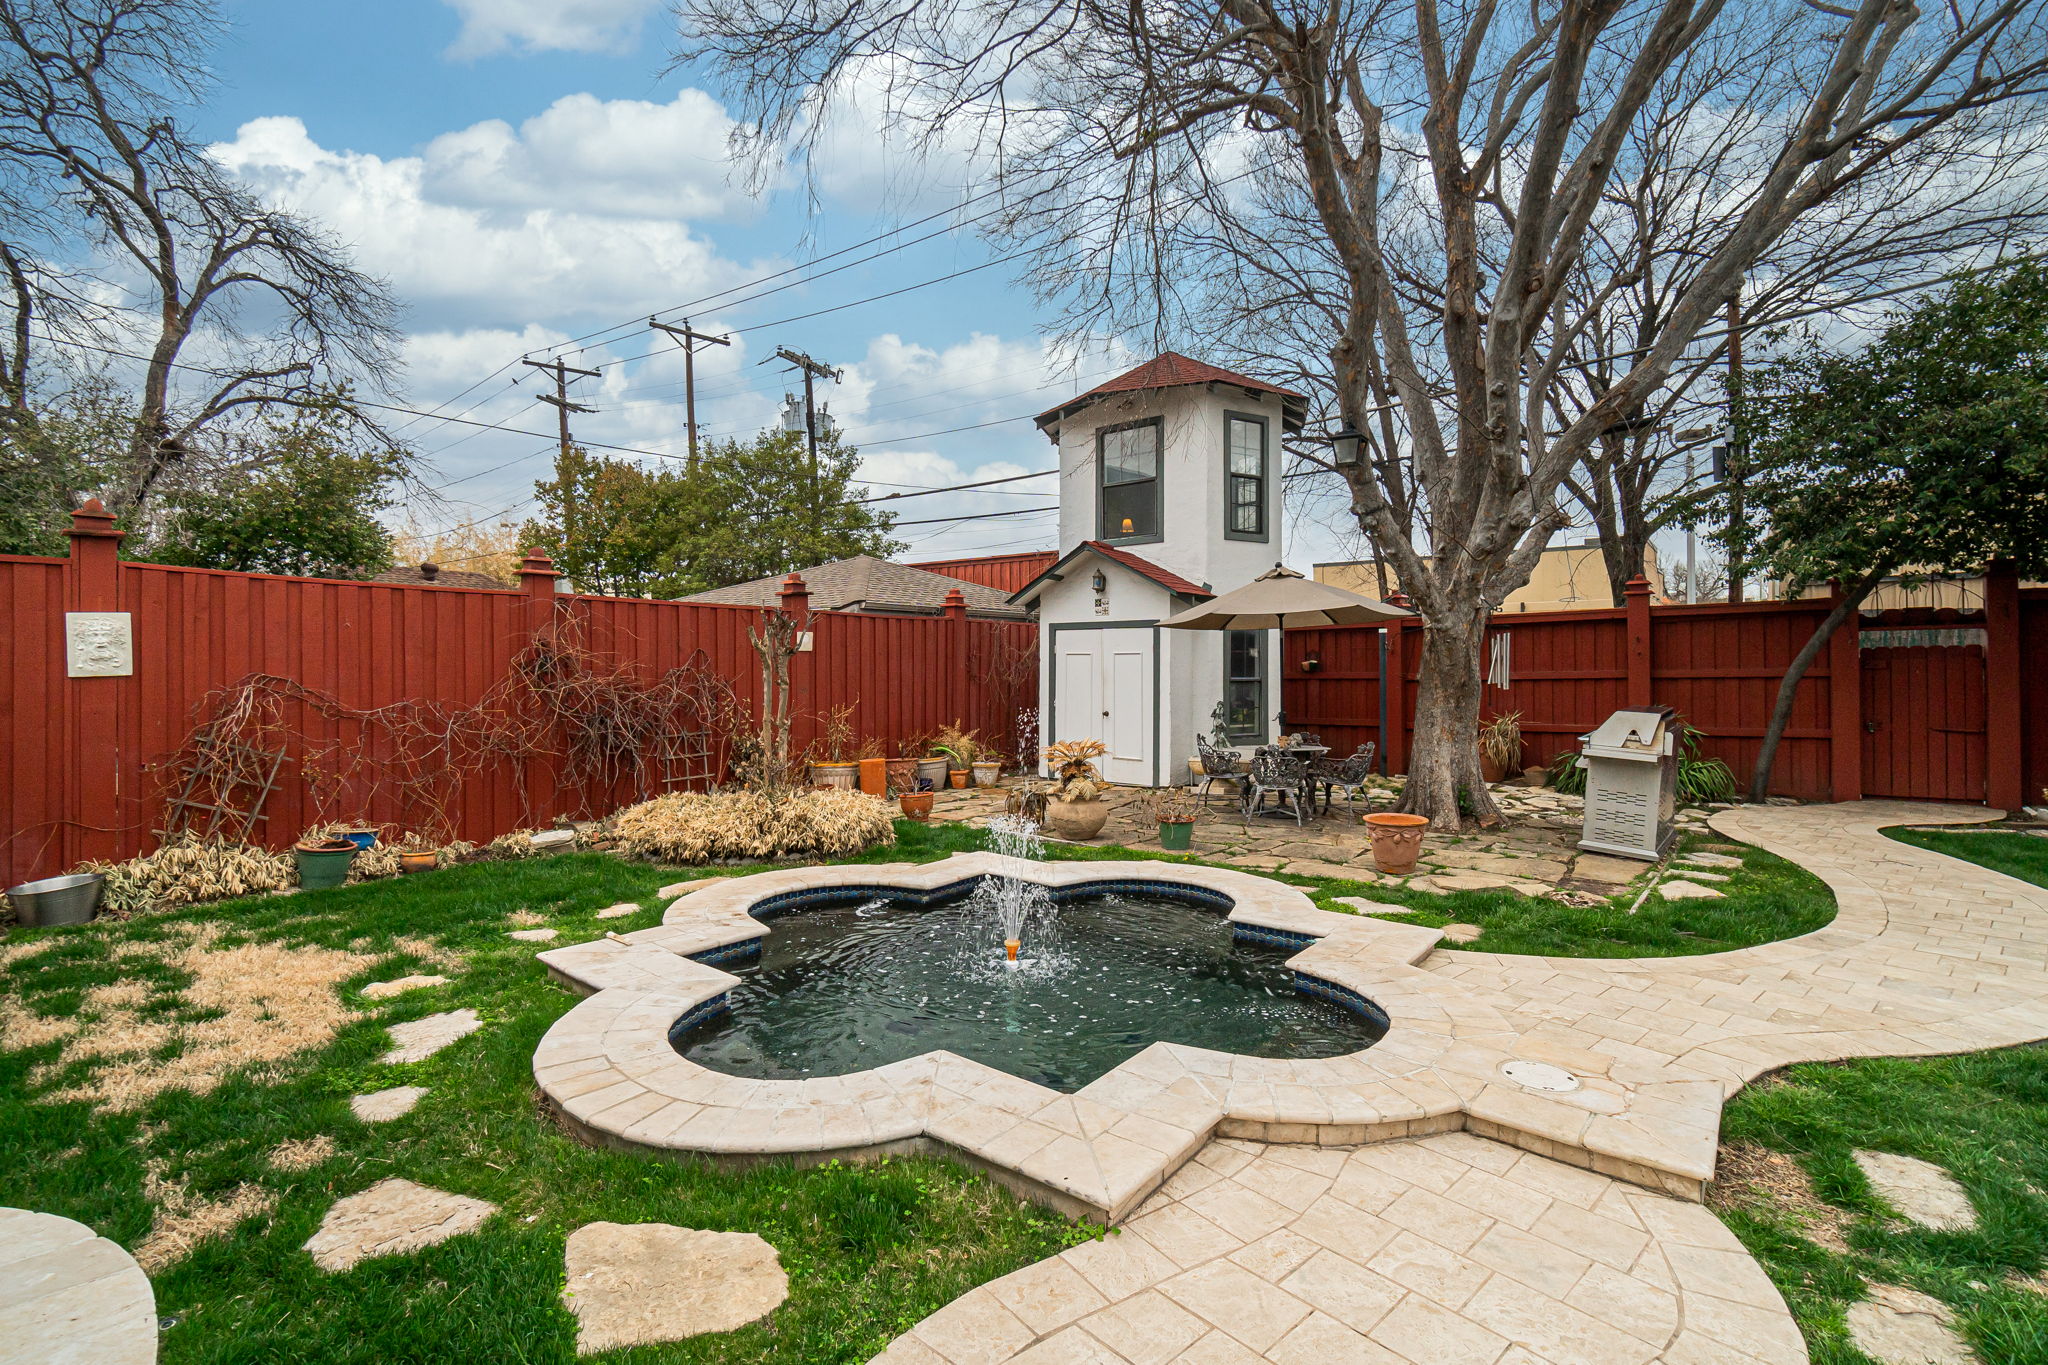    Backyard Oasis with Spool Pool Open Patio and Storage Building 